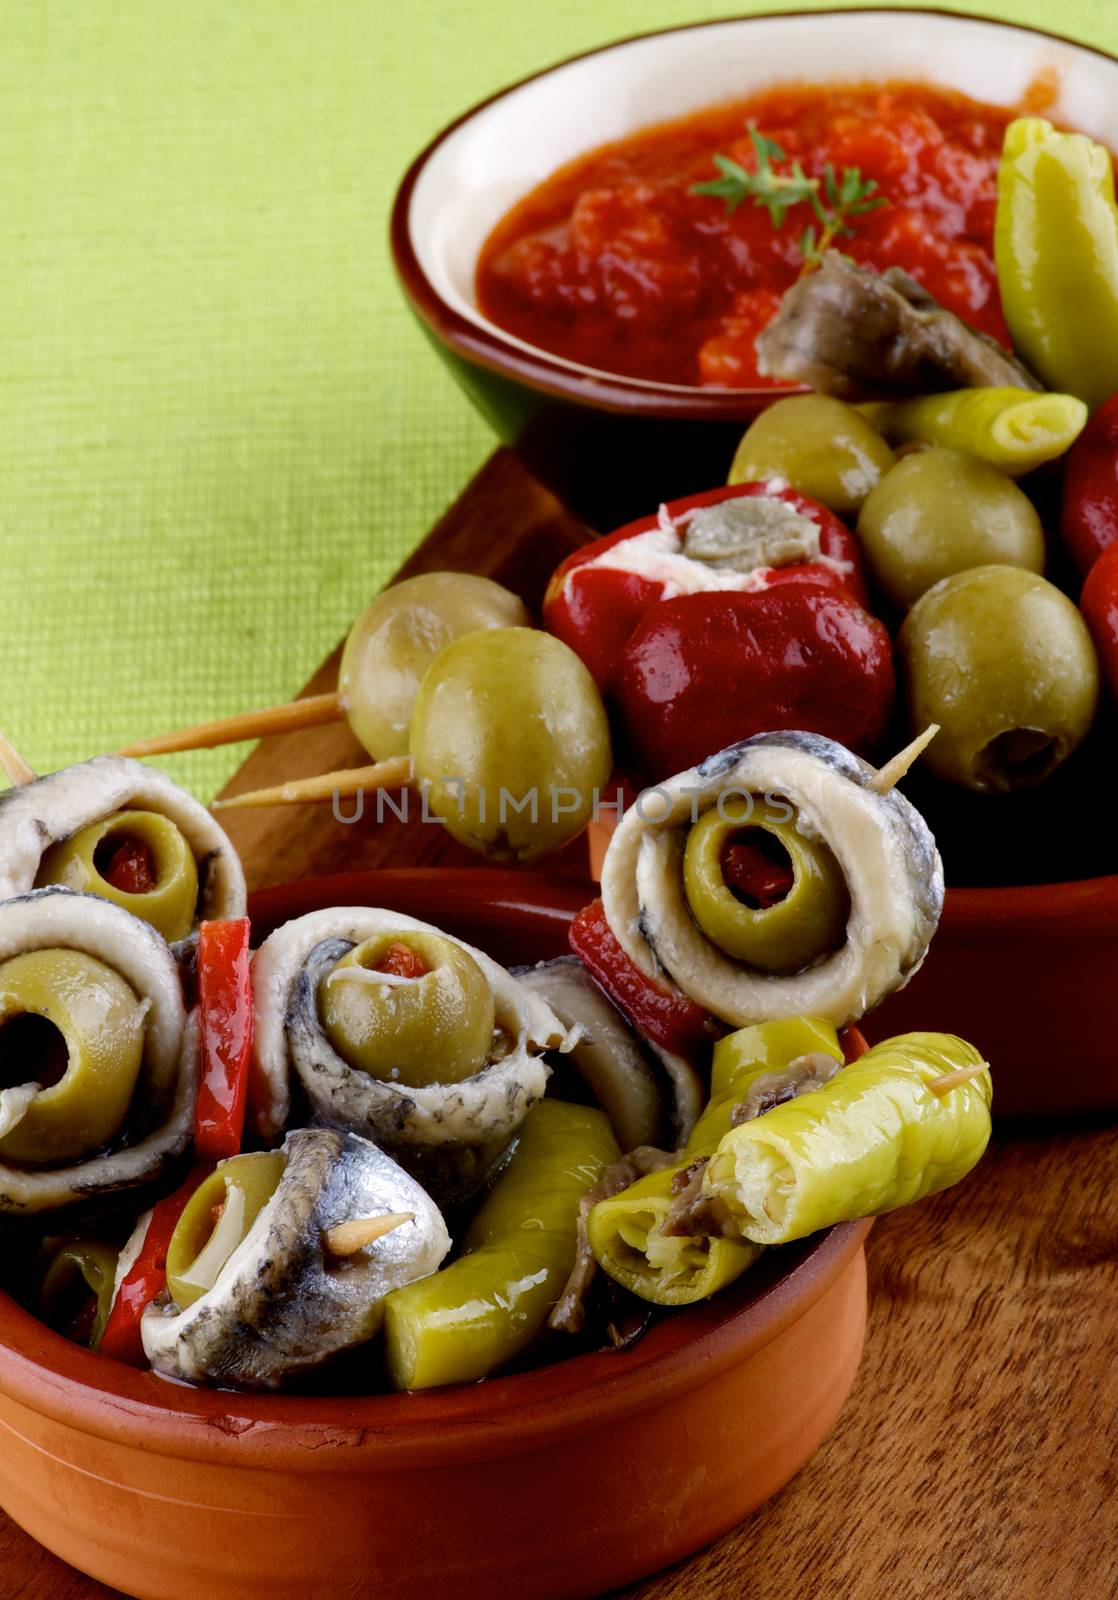 Delicious Spanish Snacks with Anchovies, Green Olives, Small Peppers Stuffed with Cheese and Tomatoes Sauce in Various Bowls closeup on Green Napkin. Focus on Foreground